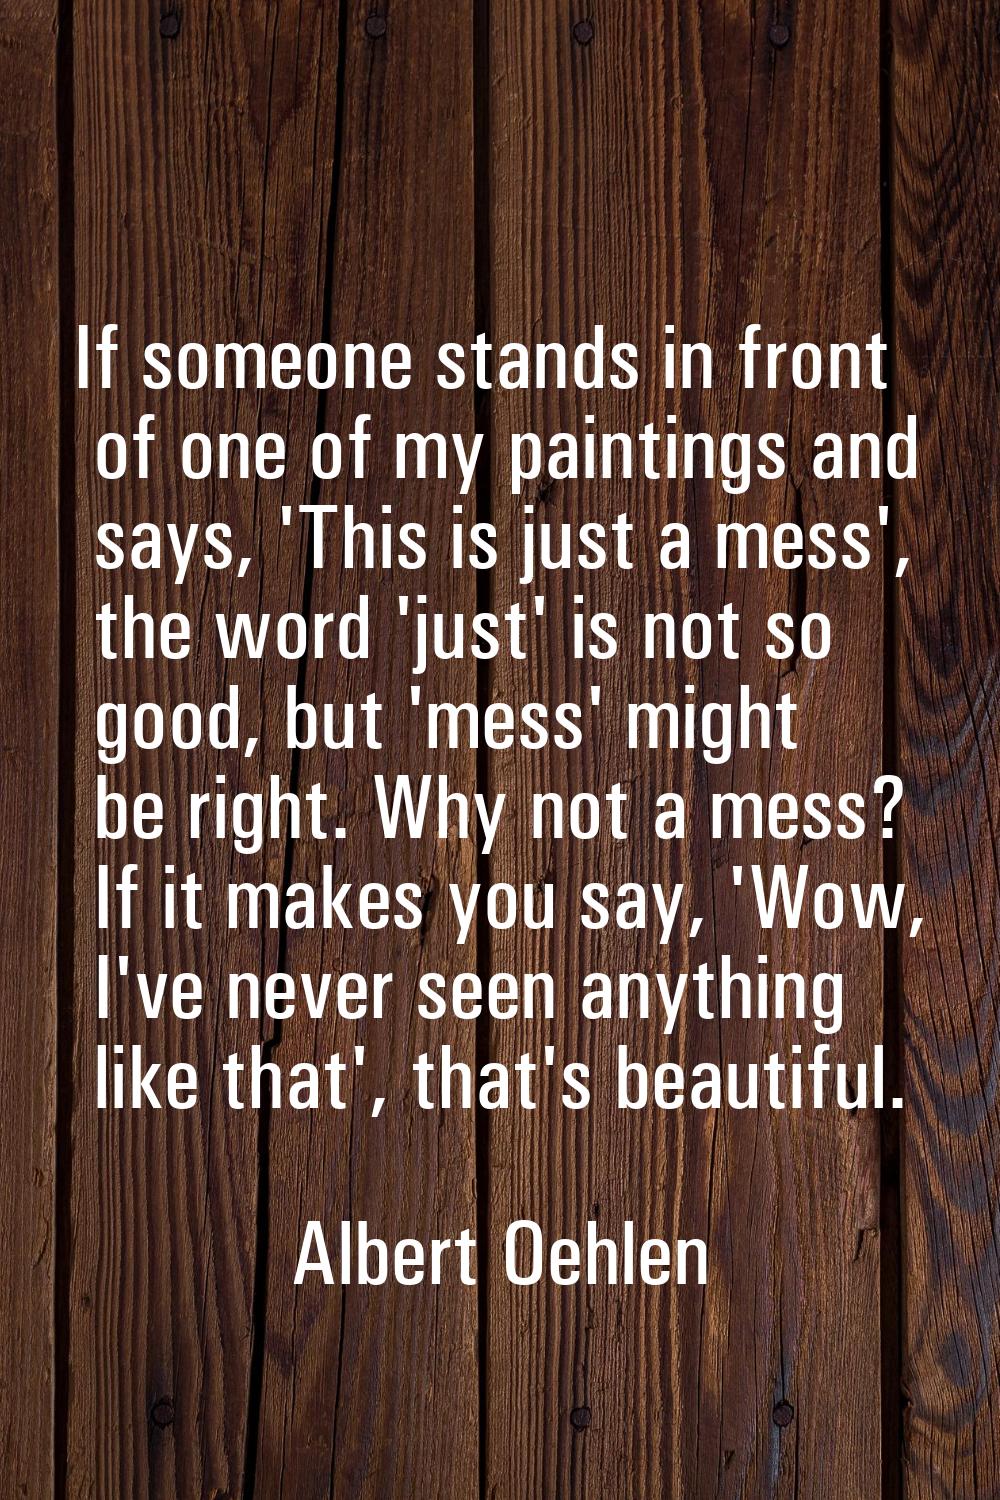 If someone stands in front of one of my paintings and says, 'This is just a mess', the word 'just' 